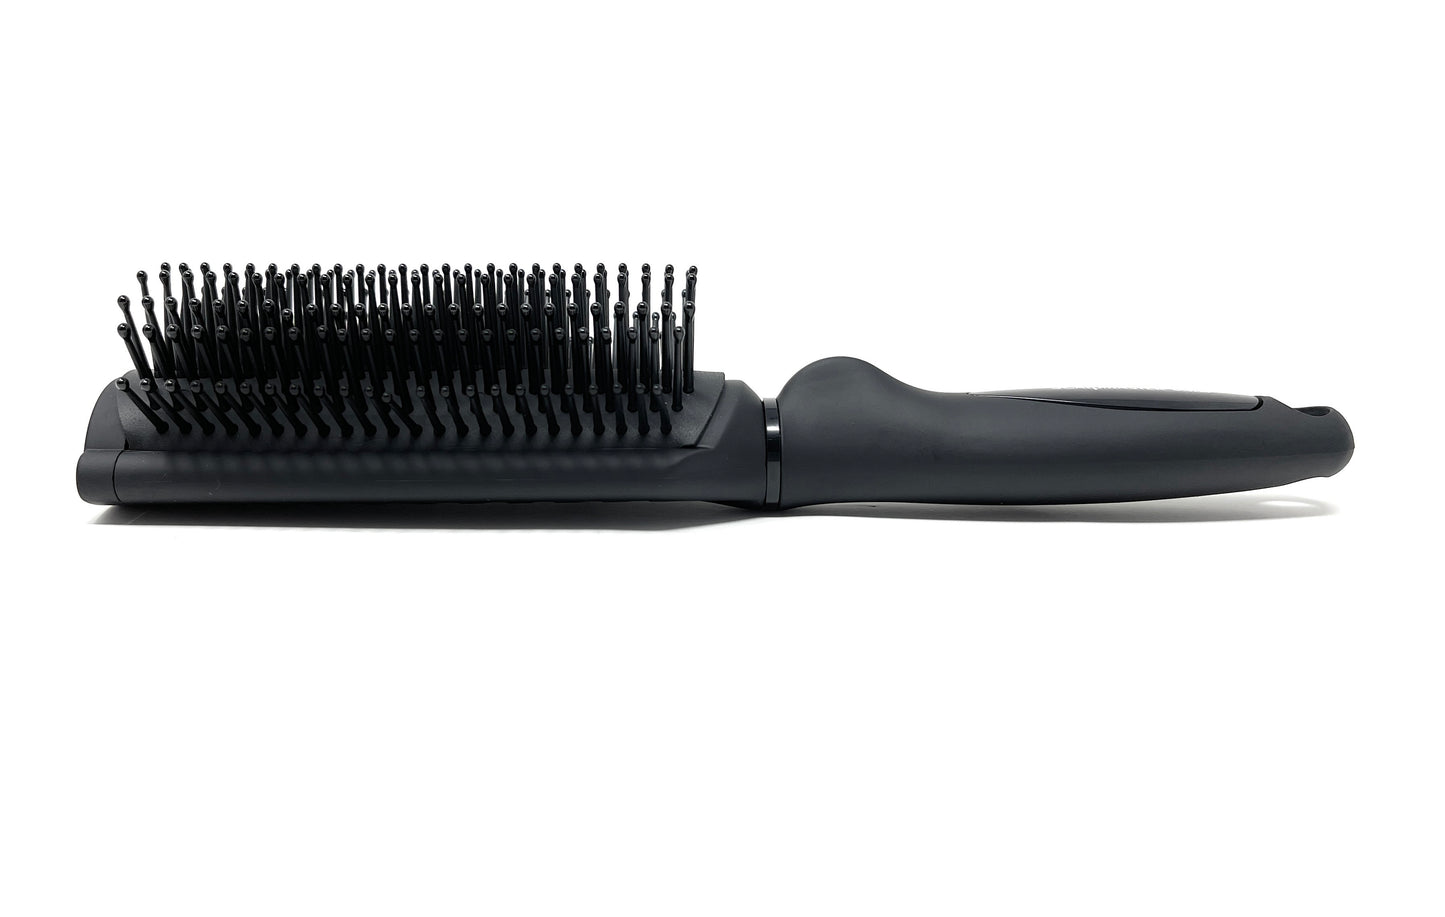 Scalpmaster Rubberized Base Hair Brush Styling For Curly Wavy Hair Black 1 Pc.